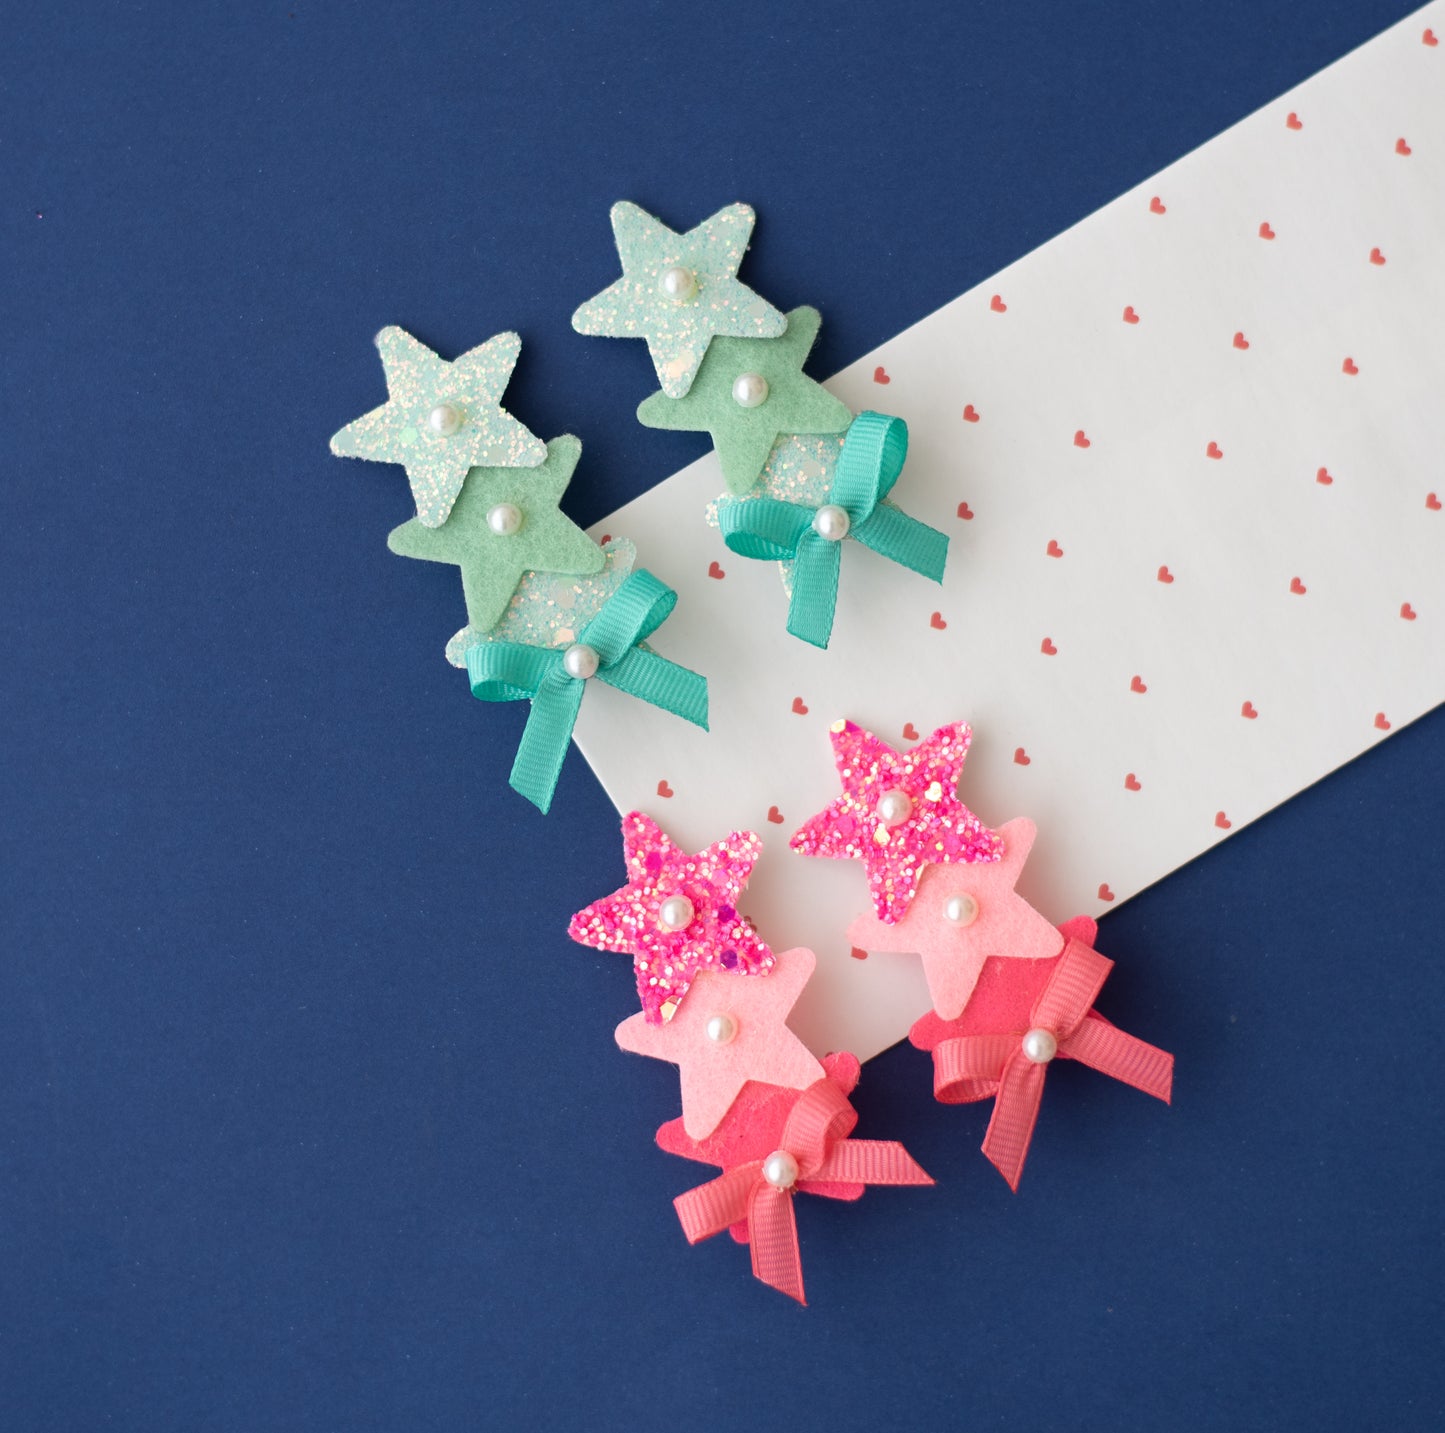 Cute glitter star alligator clips embellished with pearls and small bows  - Sea green , Pink